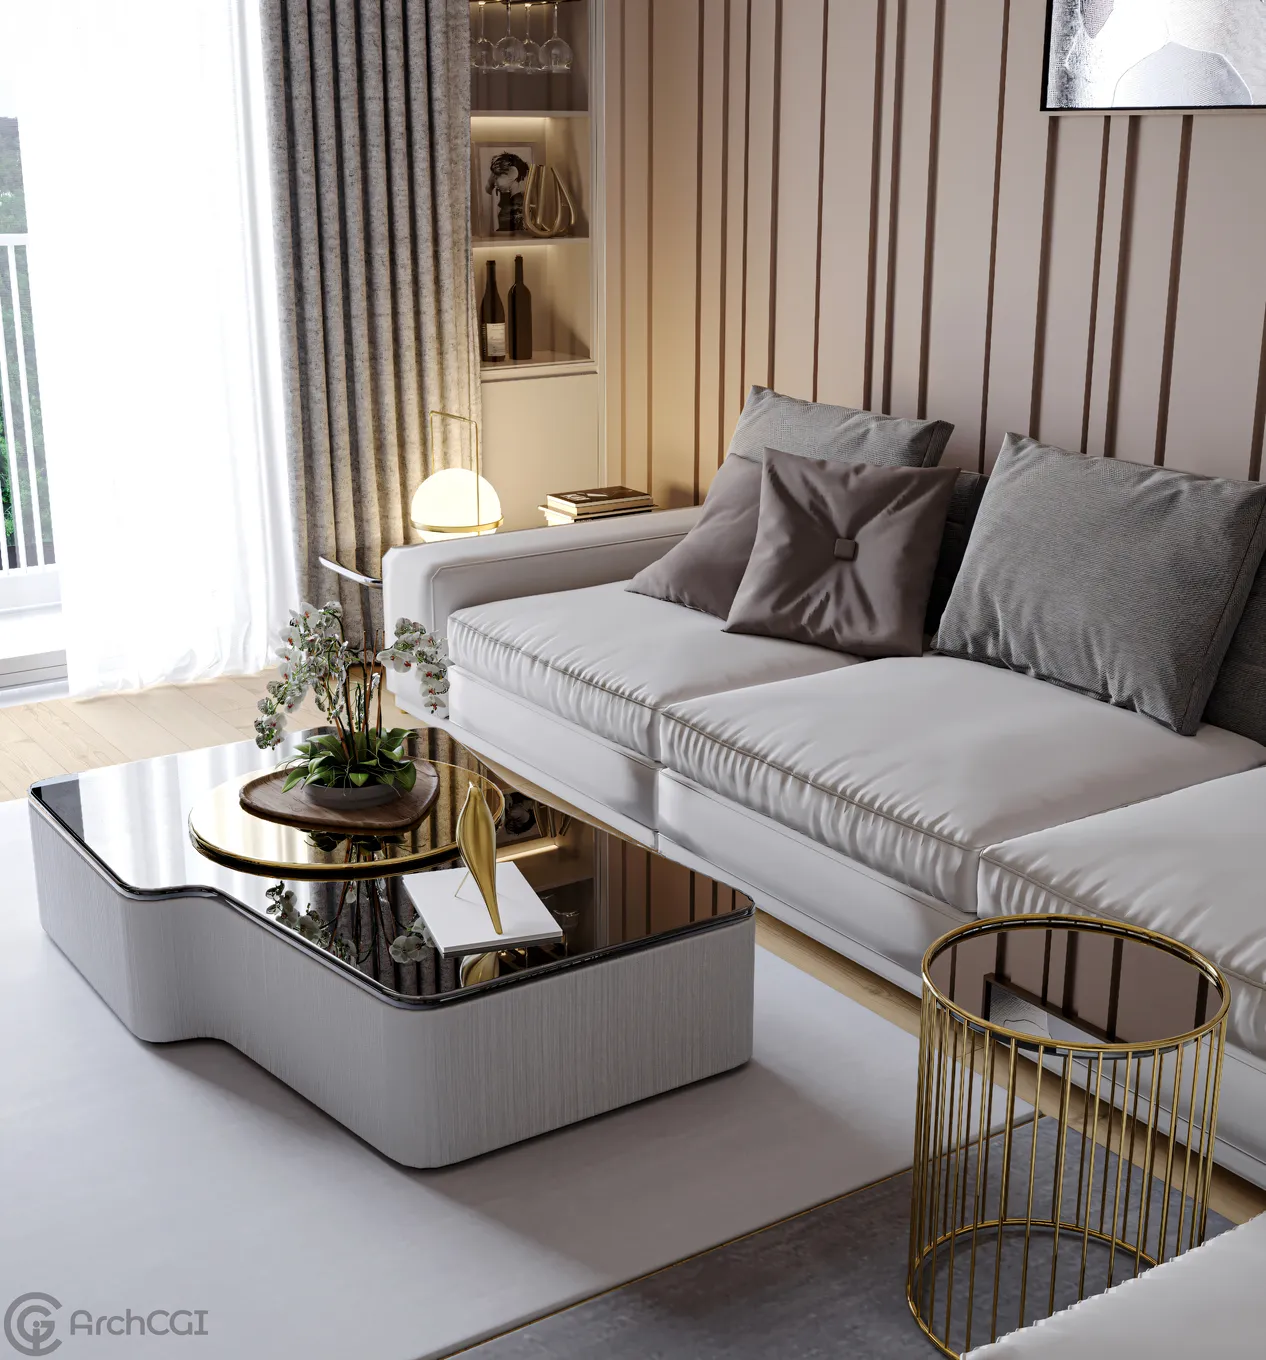 Luxurious Center Table | Sofa and Table photoreal Render | ArchCGI